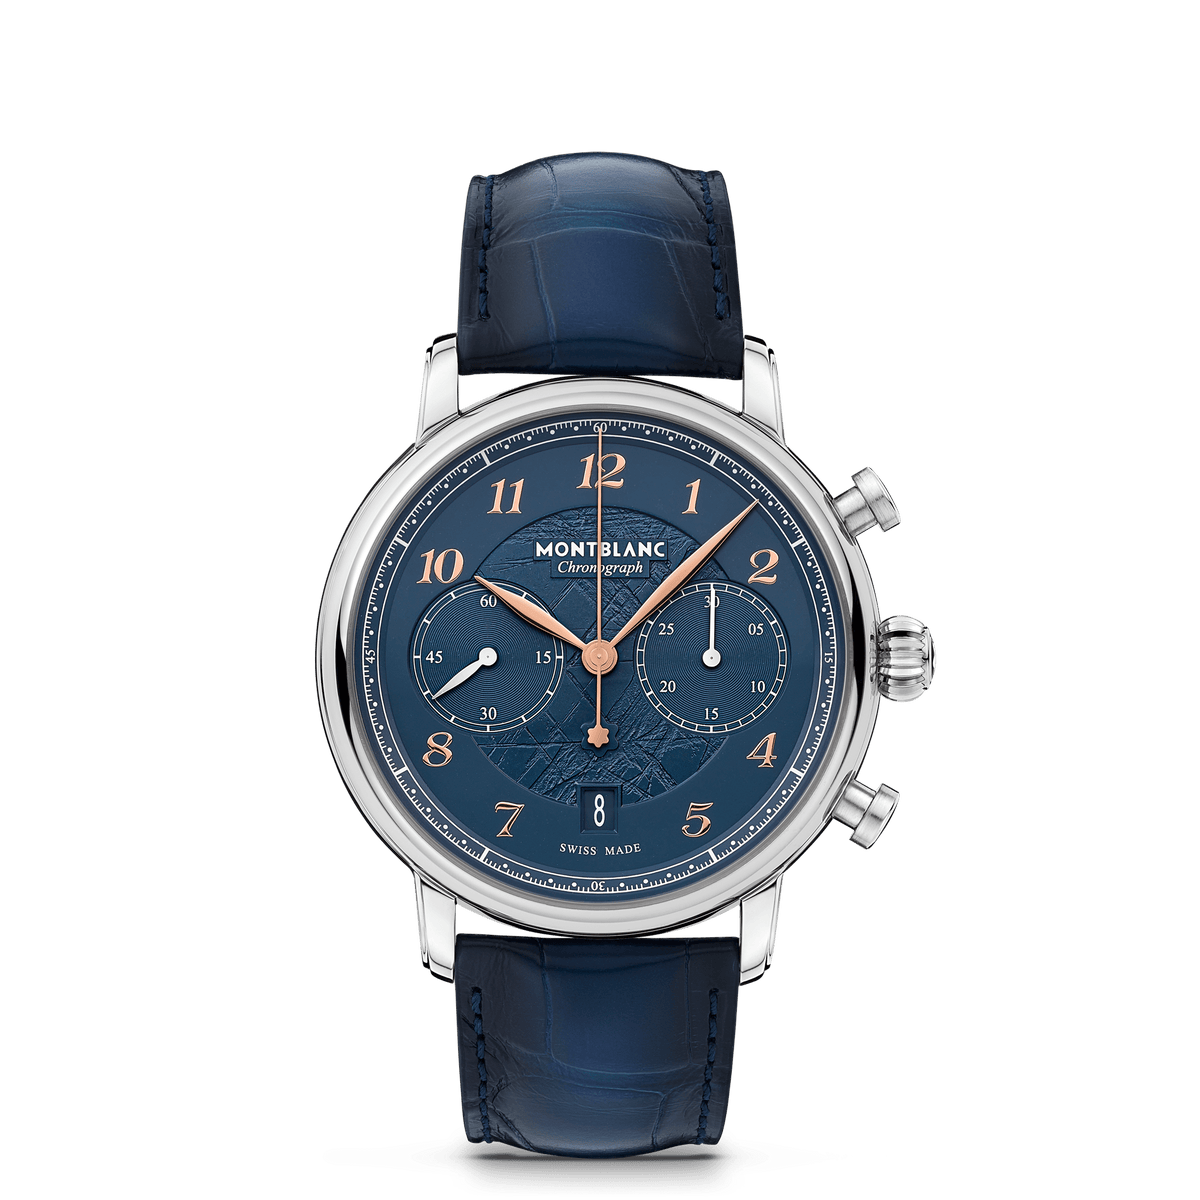 Montblanc Star Legacy Chronograph 42mm Limited Edition - 1786 pieces